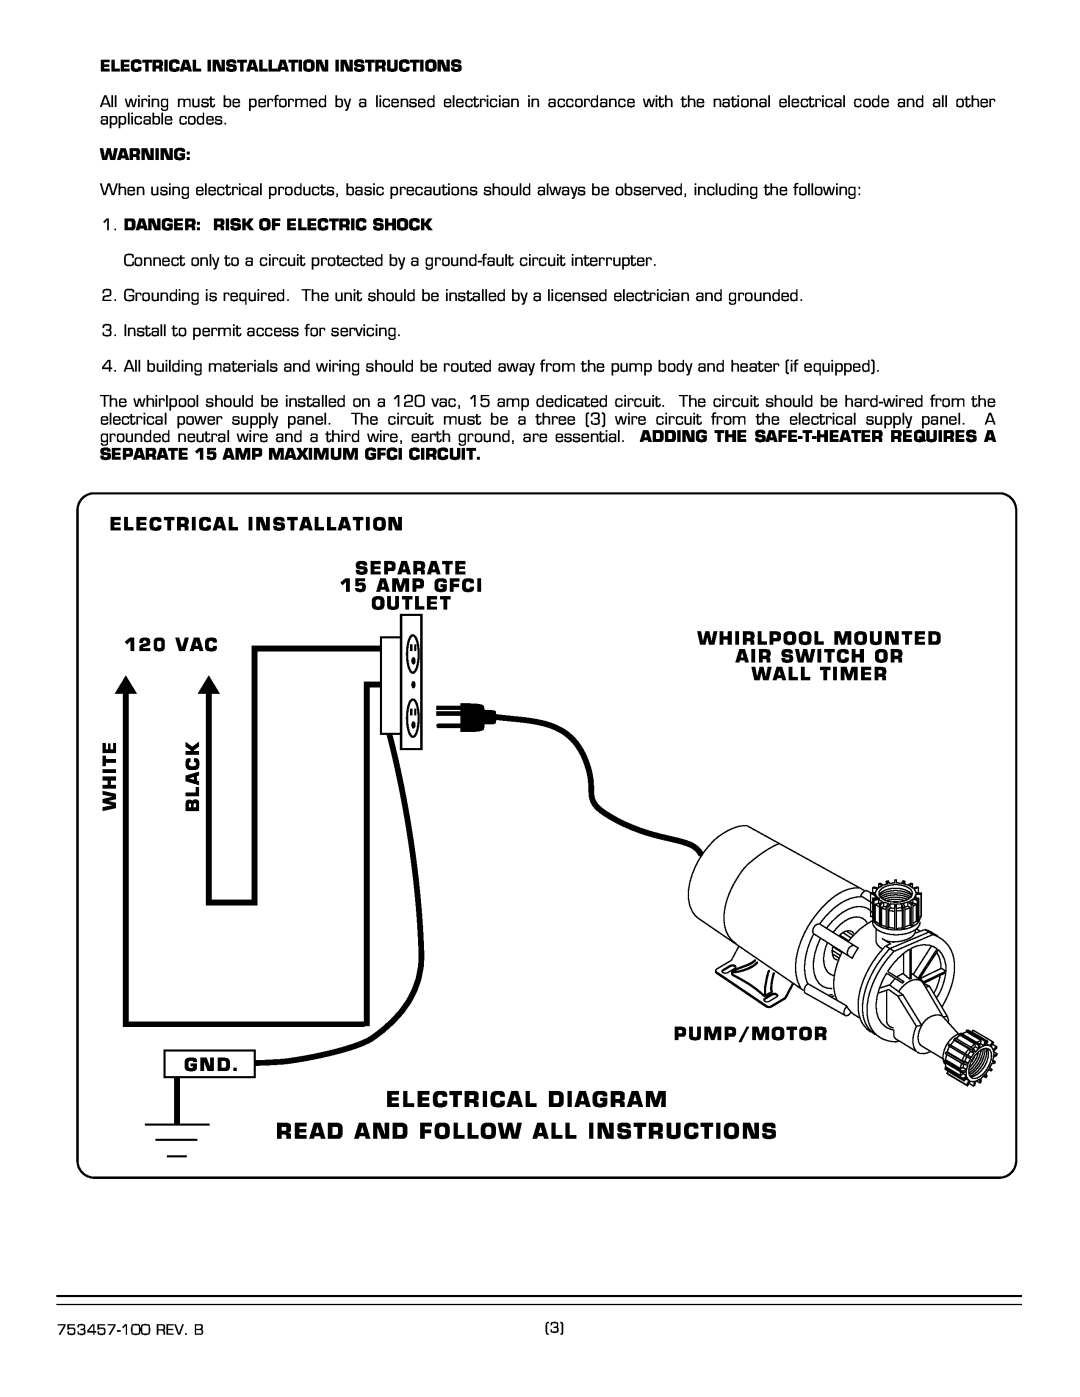 American Standard 2425.XXXW SERIES installation instructions Electrical Diagram, Read And Follow All Instructions 